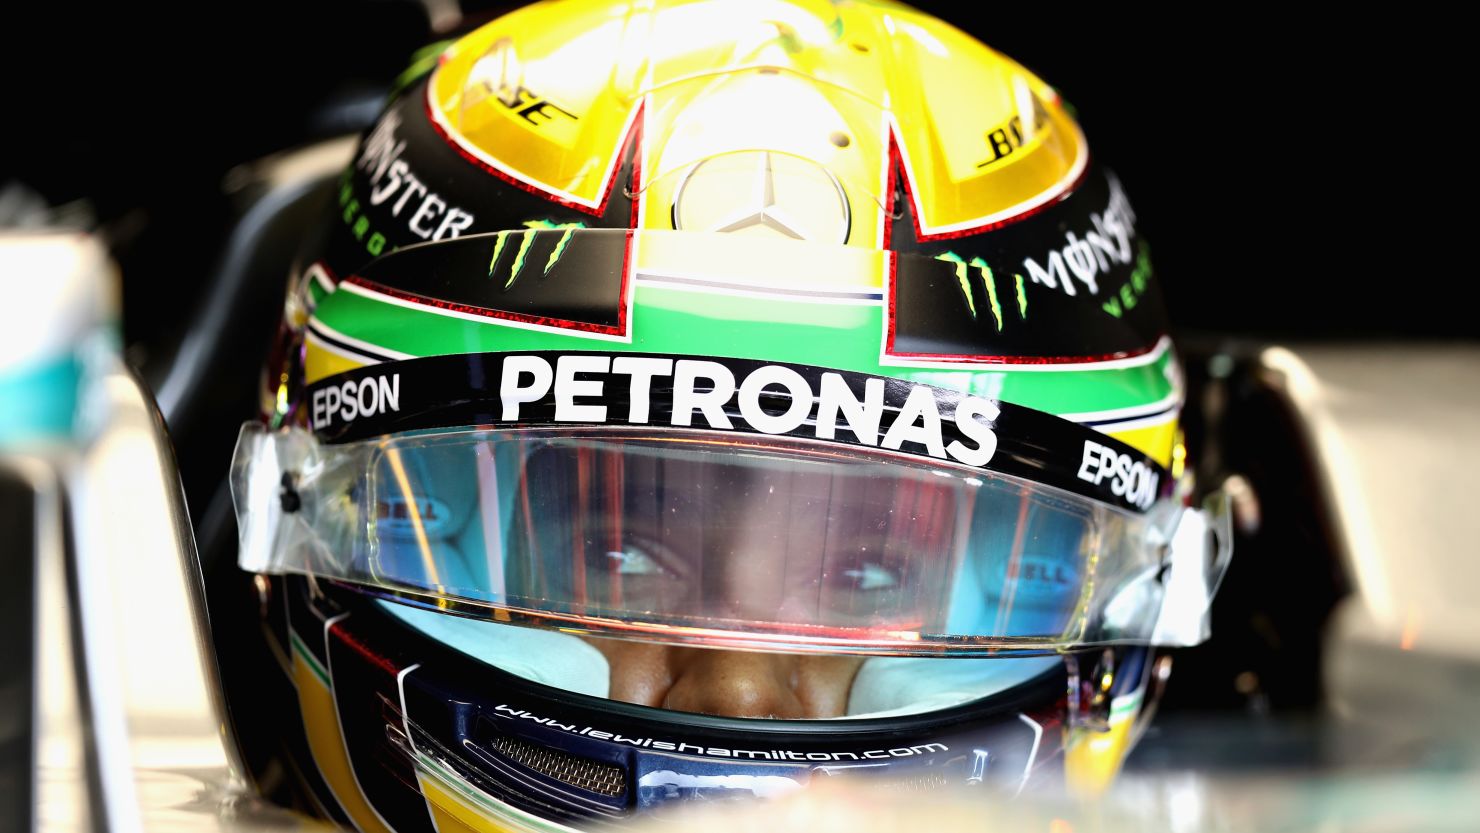 Lewis Hamilton beat his rival Nico Rosberg to pole position in Brazil by a tenth of a second.